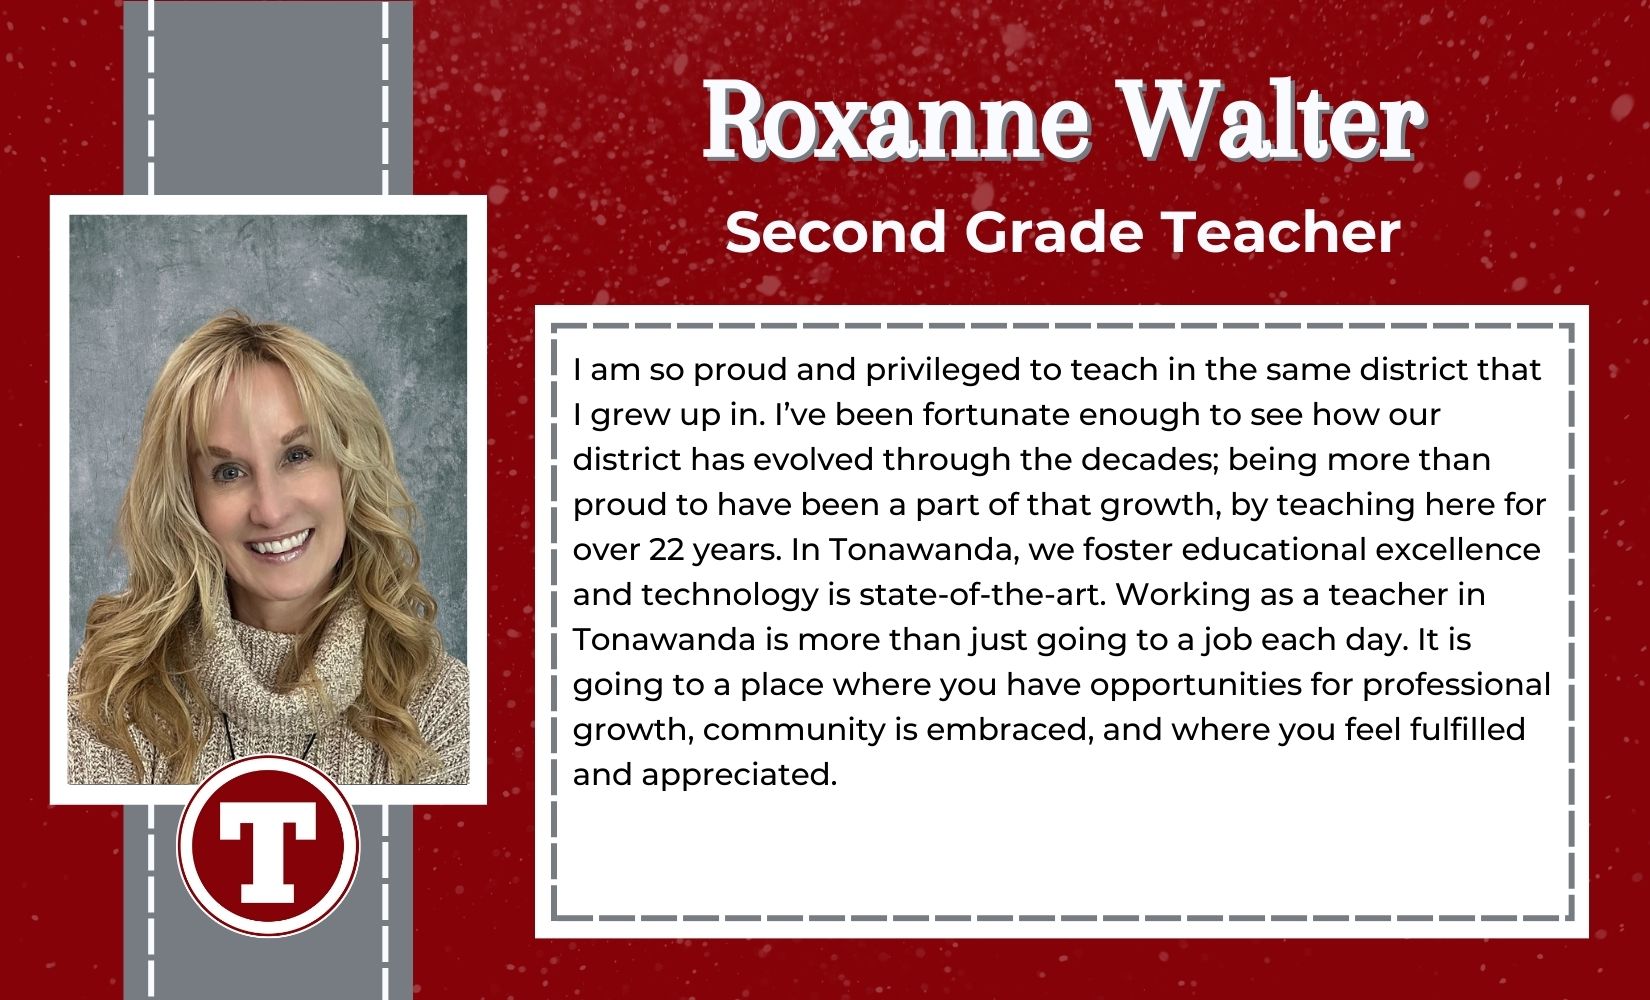 Roxanne Walter, Second Grade Teacher, I am so proud and privileged to teach in the same district that I grew up in. I’ve been fortunate enough to see how our district has evolved through the decades; being more than proud to have been a part of that growth, by teaching here for over 22 years. In Tonawanda, we foster educational excellence and technology is state-of-the-art. Working as a teacher in Tonawanda is more than just going to a job each day. It is going to a place where you have opportunities for professional growth, community is embraced, and where you feel fulfilled and appreciated.